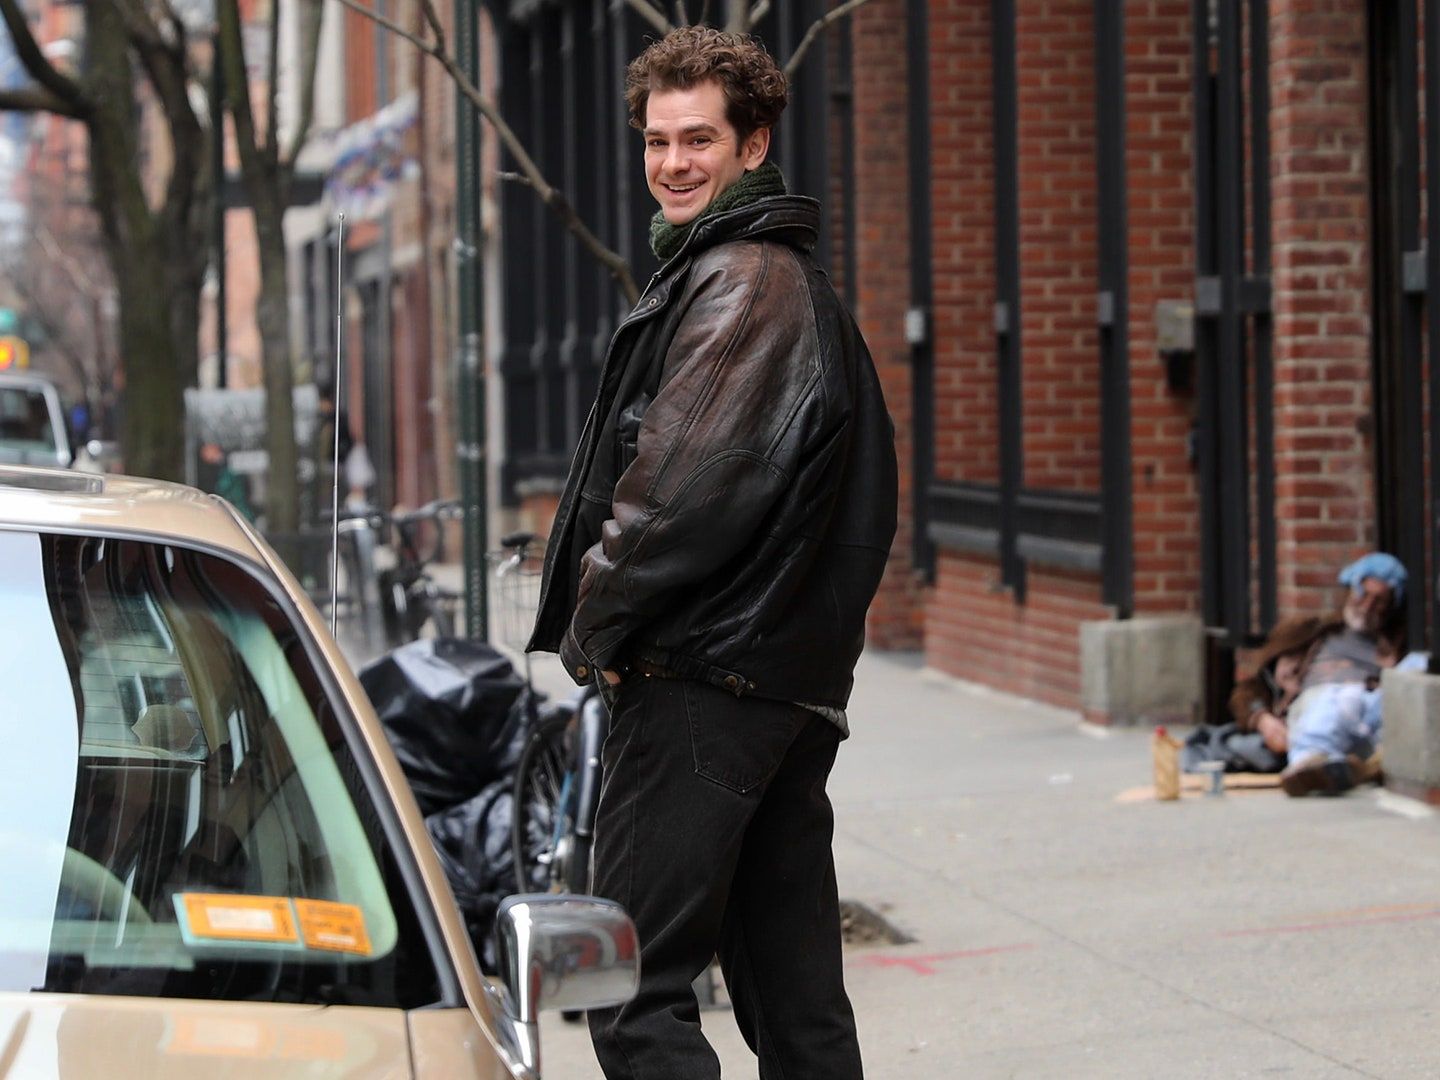 Andrew Garfield just gave us a 1990s big fit to rival Ross Gellar